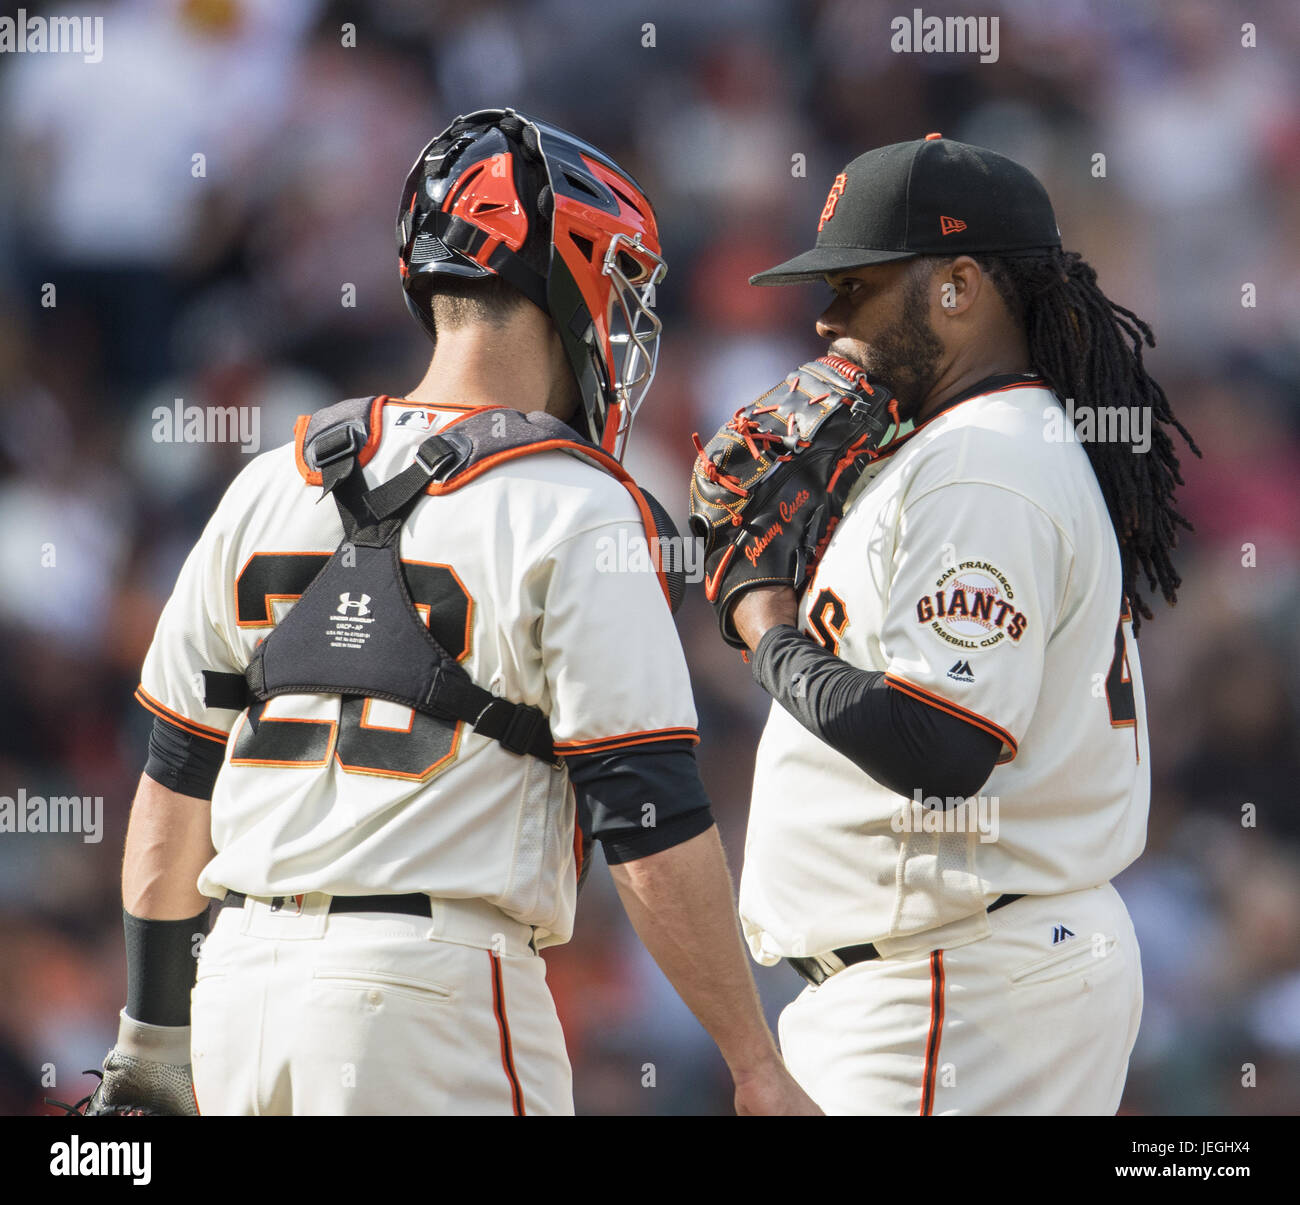 San Francisco, California, USA. 24th June, 2017. After NY left fielder Yoenis Cespedes' sixth inning single, San Francisco Giants catcher Buster Posey (28) walks to the mound to talk with San Francisco Giants starting pitcher Johnny Cueto (47), during a MLB baseball game between the New York Mets and the San Francisco Giants on ''Giants Retro Bobblehead Day'' at AT&T Park in San Francisco, California. Valerie Shoaps/CSM/Alamy Live News Stock Photo